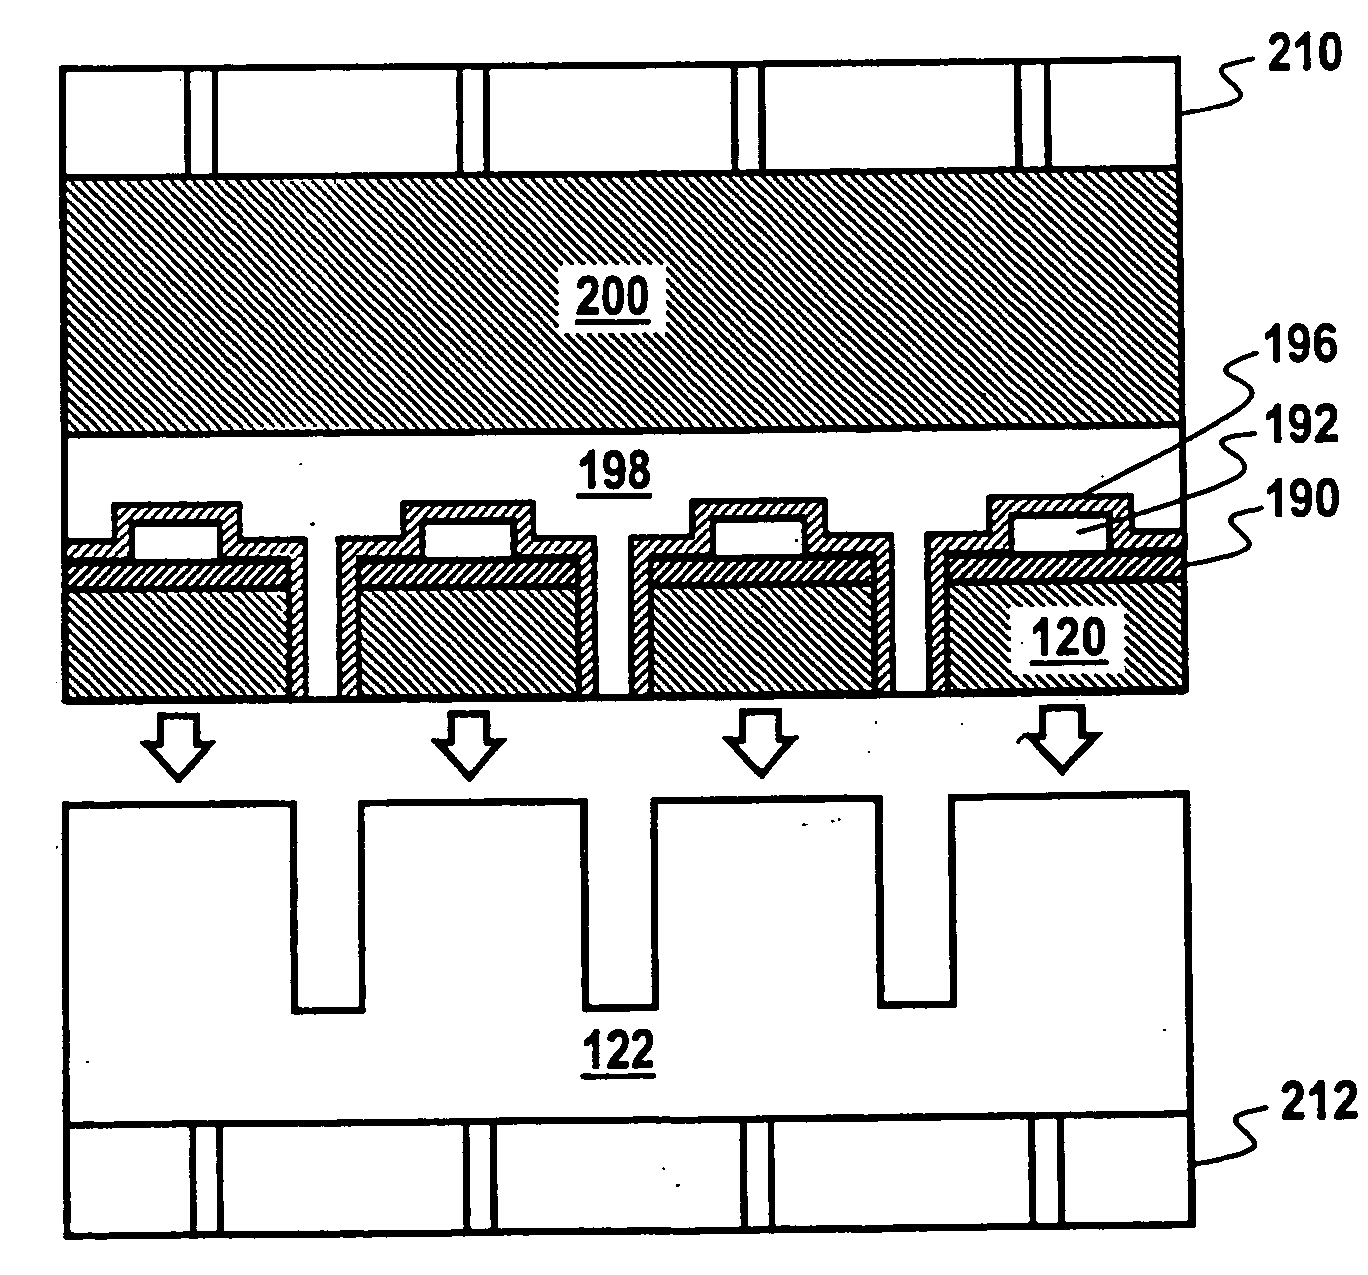 Method of fabricating vertical devices using a metal support film